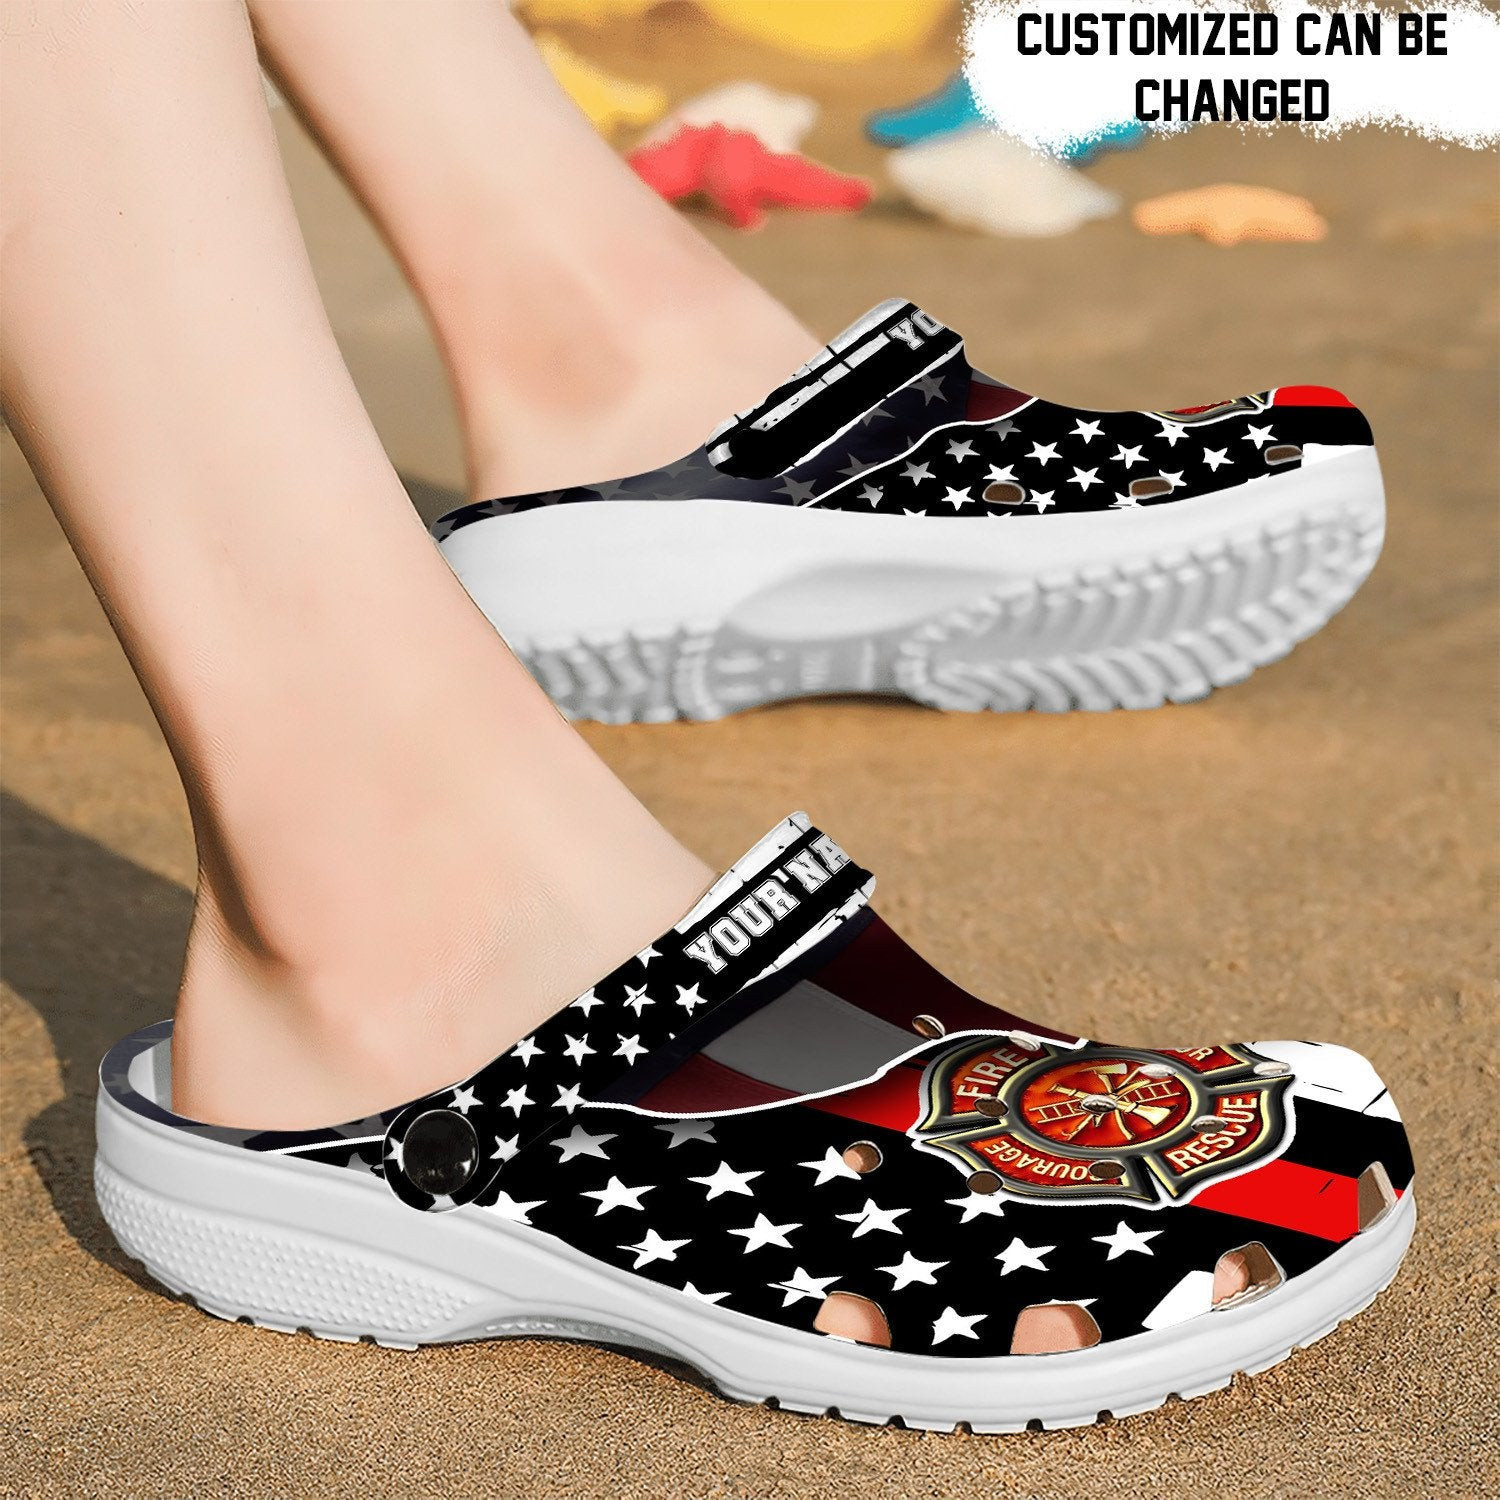 Firefighter Usa Flag Black Crocs Shoes - Firefighter Shoes Croc Clogs Customize Name Birthday Gift